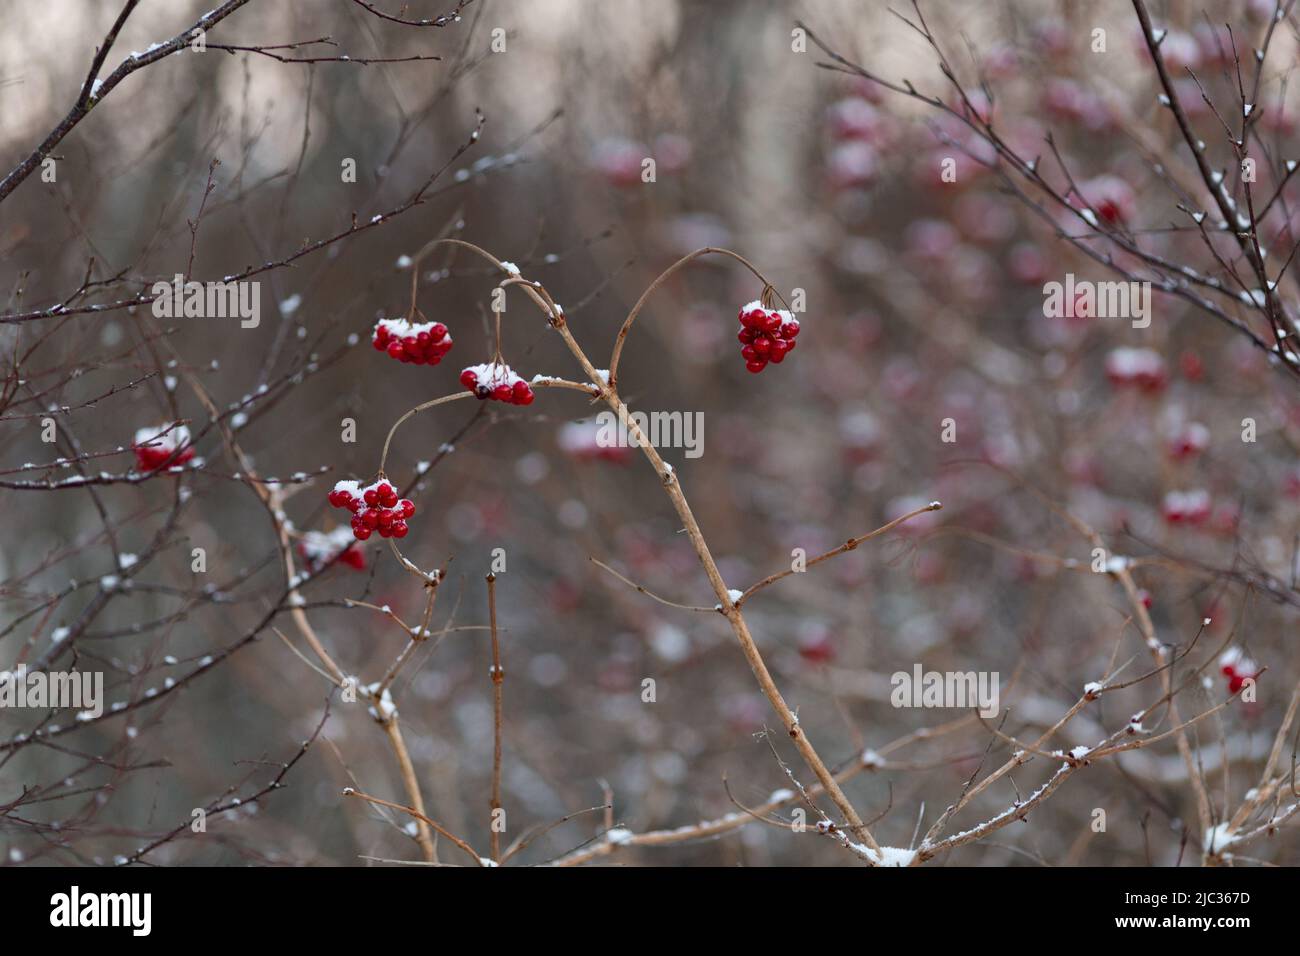 Viburnum opulus, guelder rose, in natural habitat in Brønnøy, Norway. Winter photo with snow on the clear red berries/fruits. Stock Photo